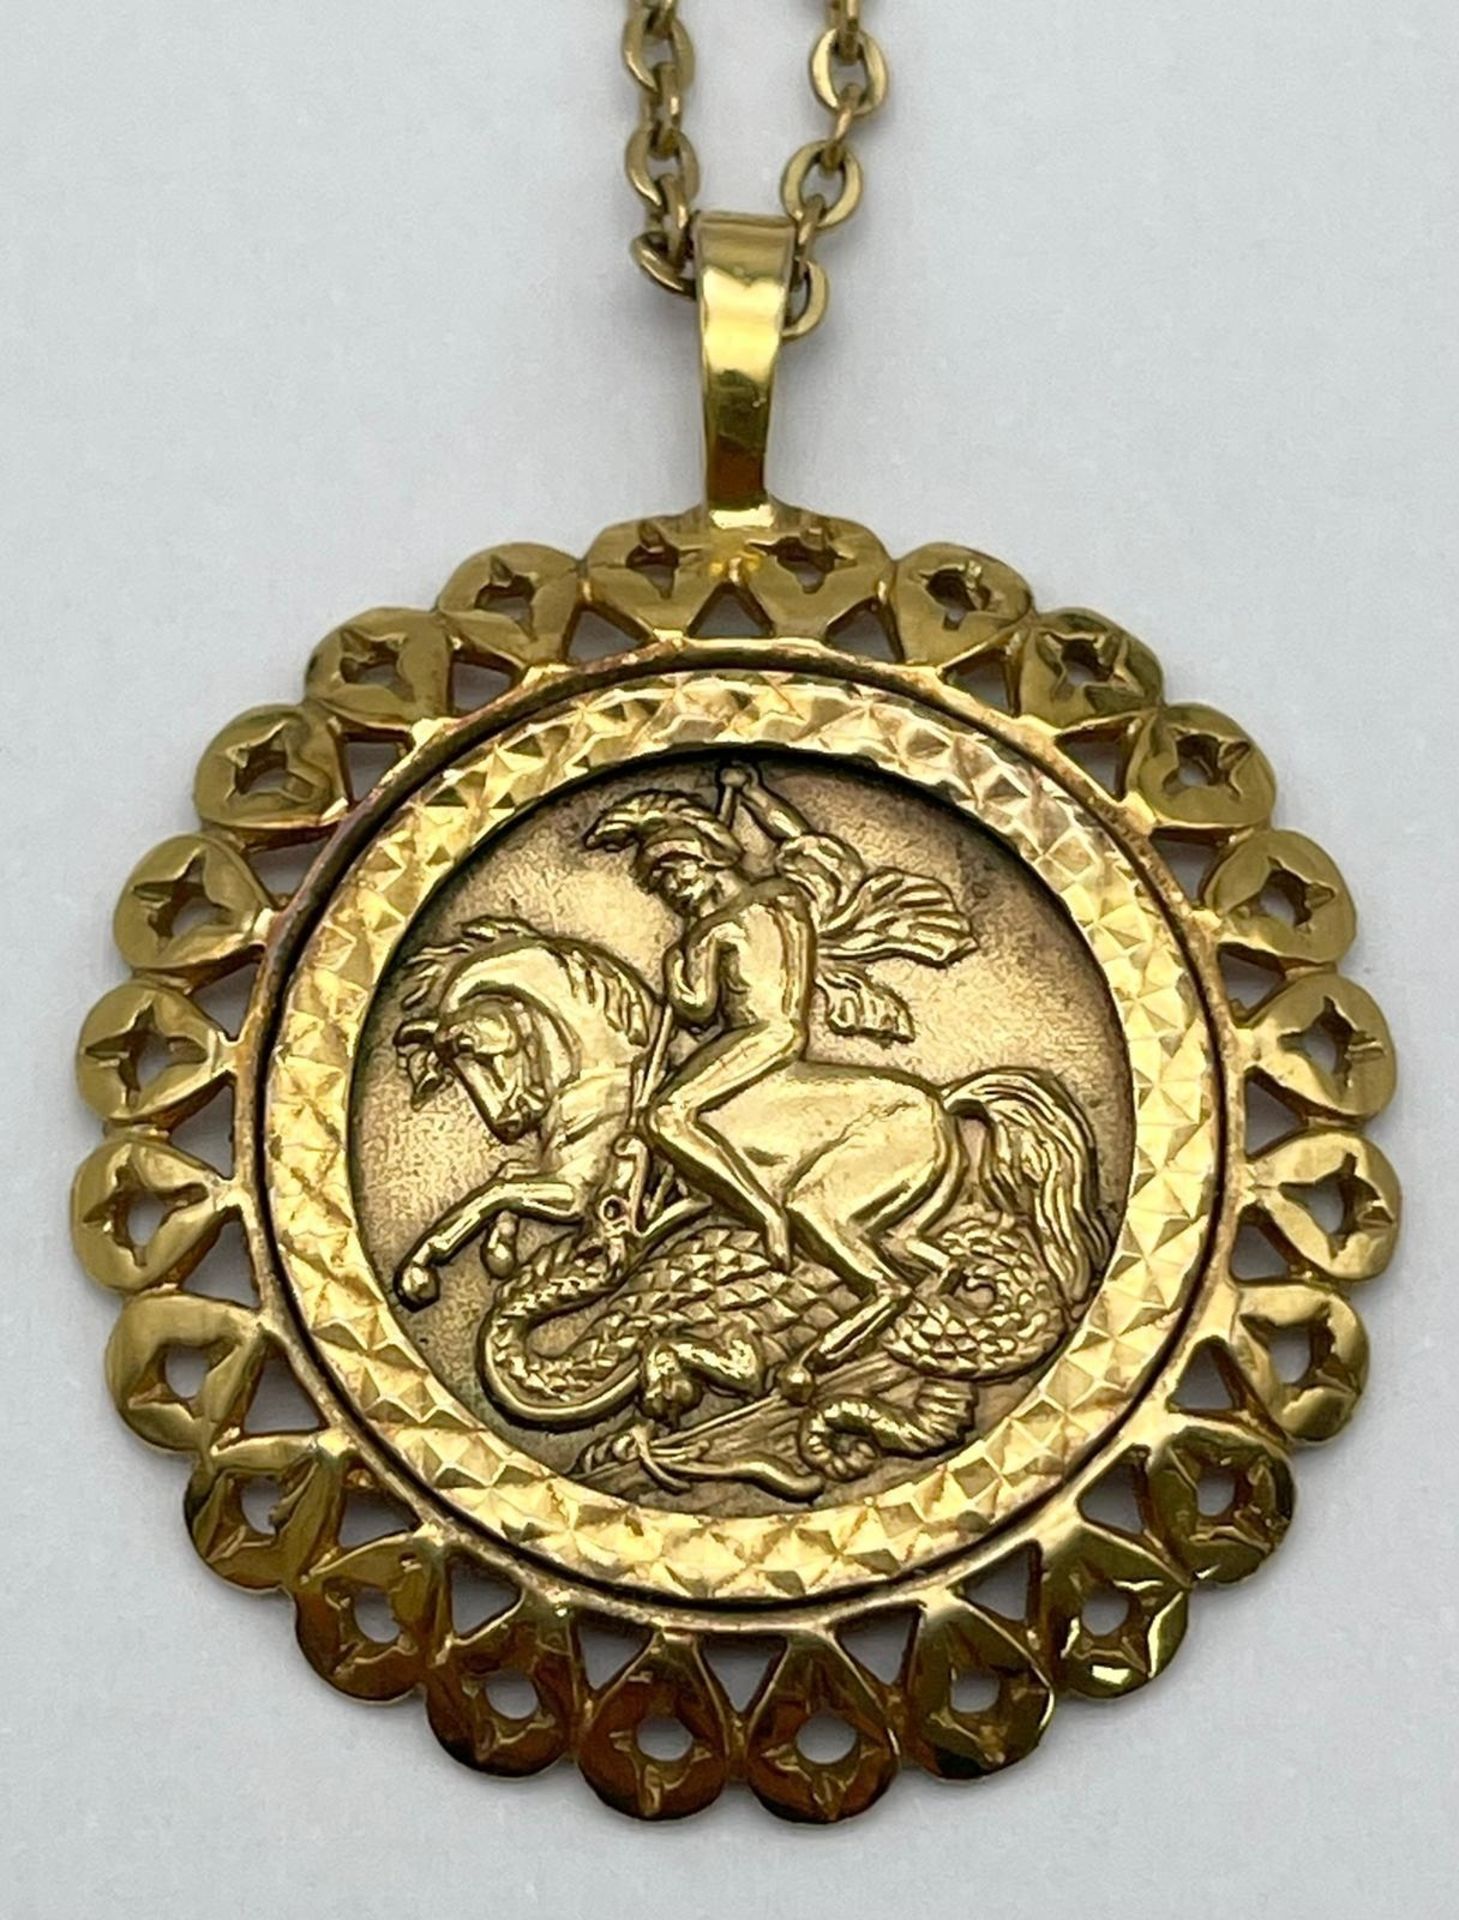 A Vintage 9K Gold Dragon Slaying Pendant on a 9K Yellow Gold Link Necklace/Chain. 27mm diameter - - Bild 3 aus 5